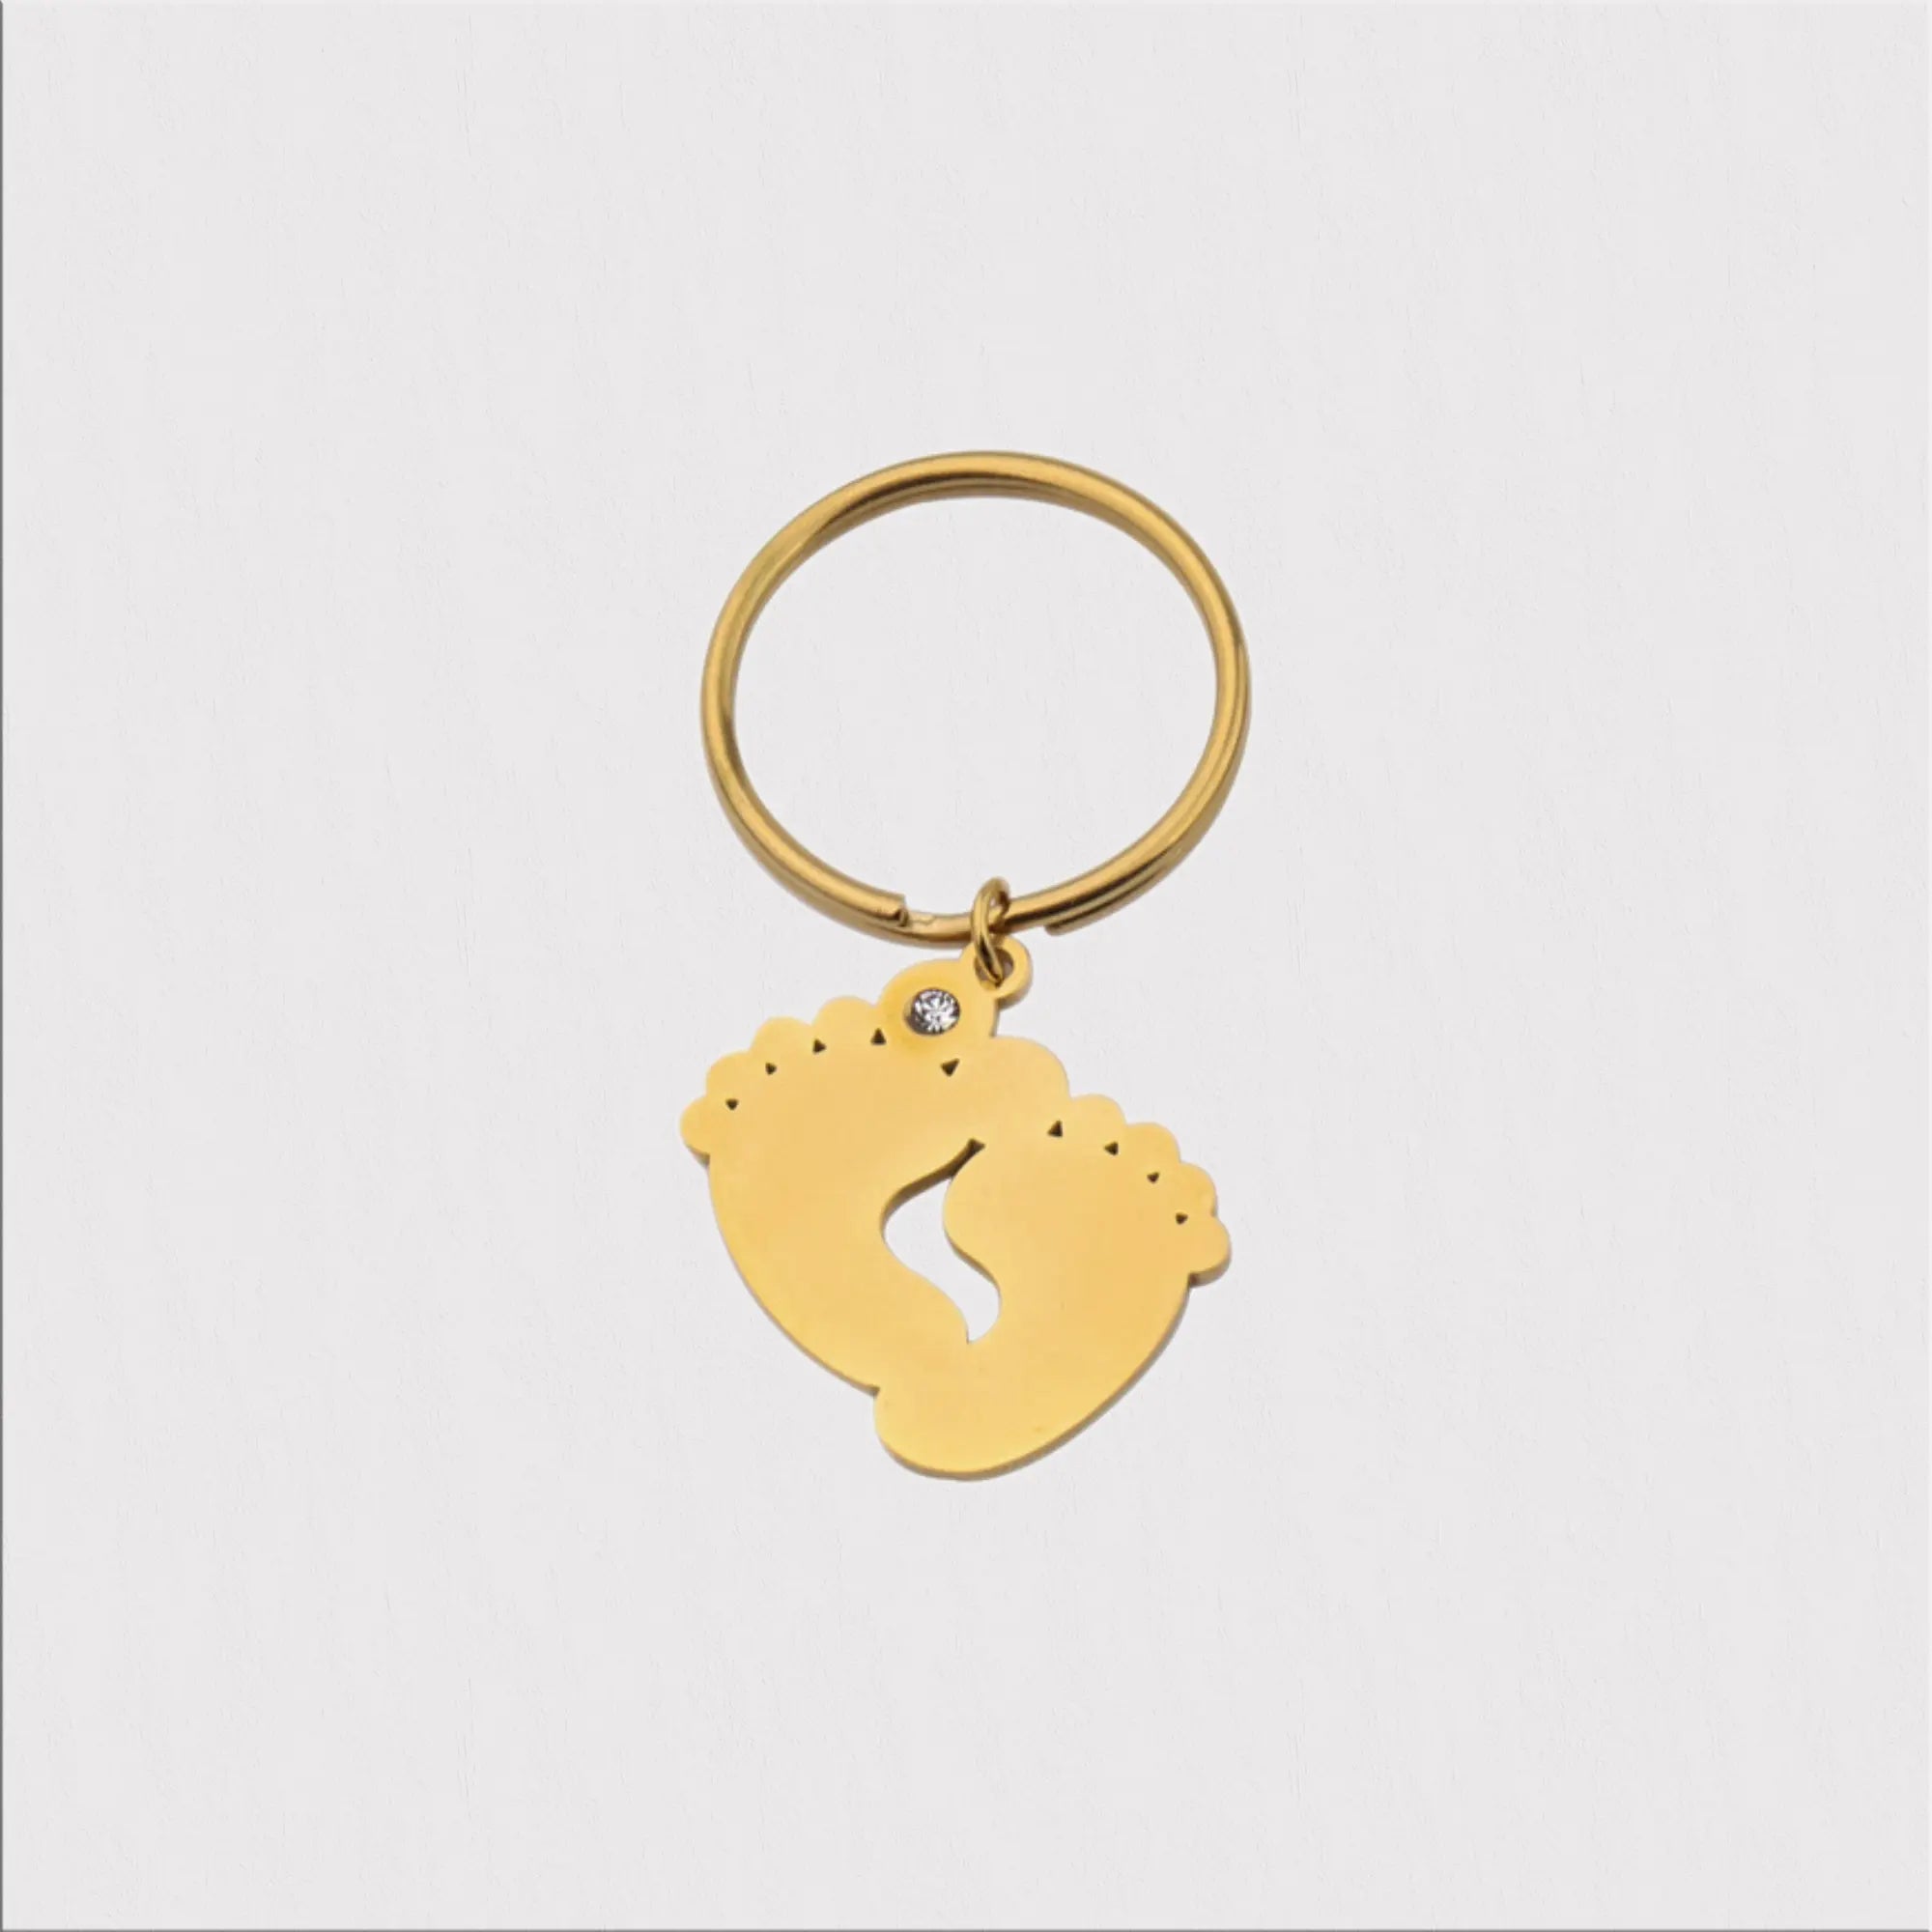 Birth Announcement, Personalized Baby Keychain